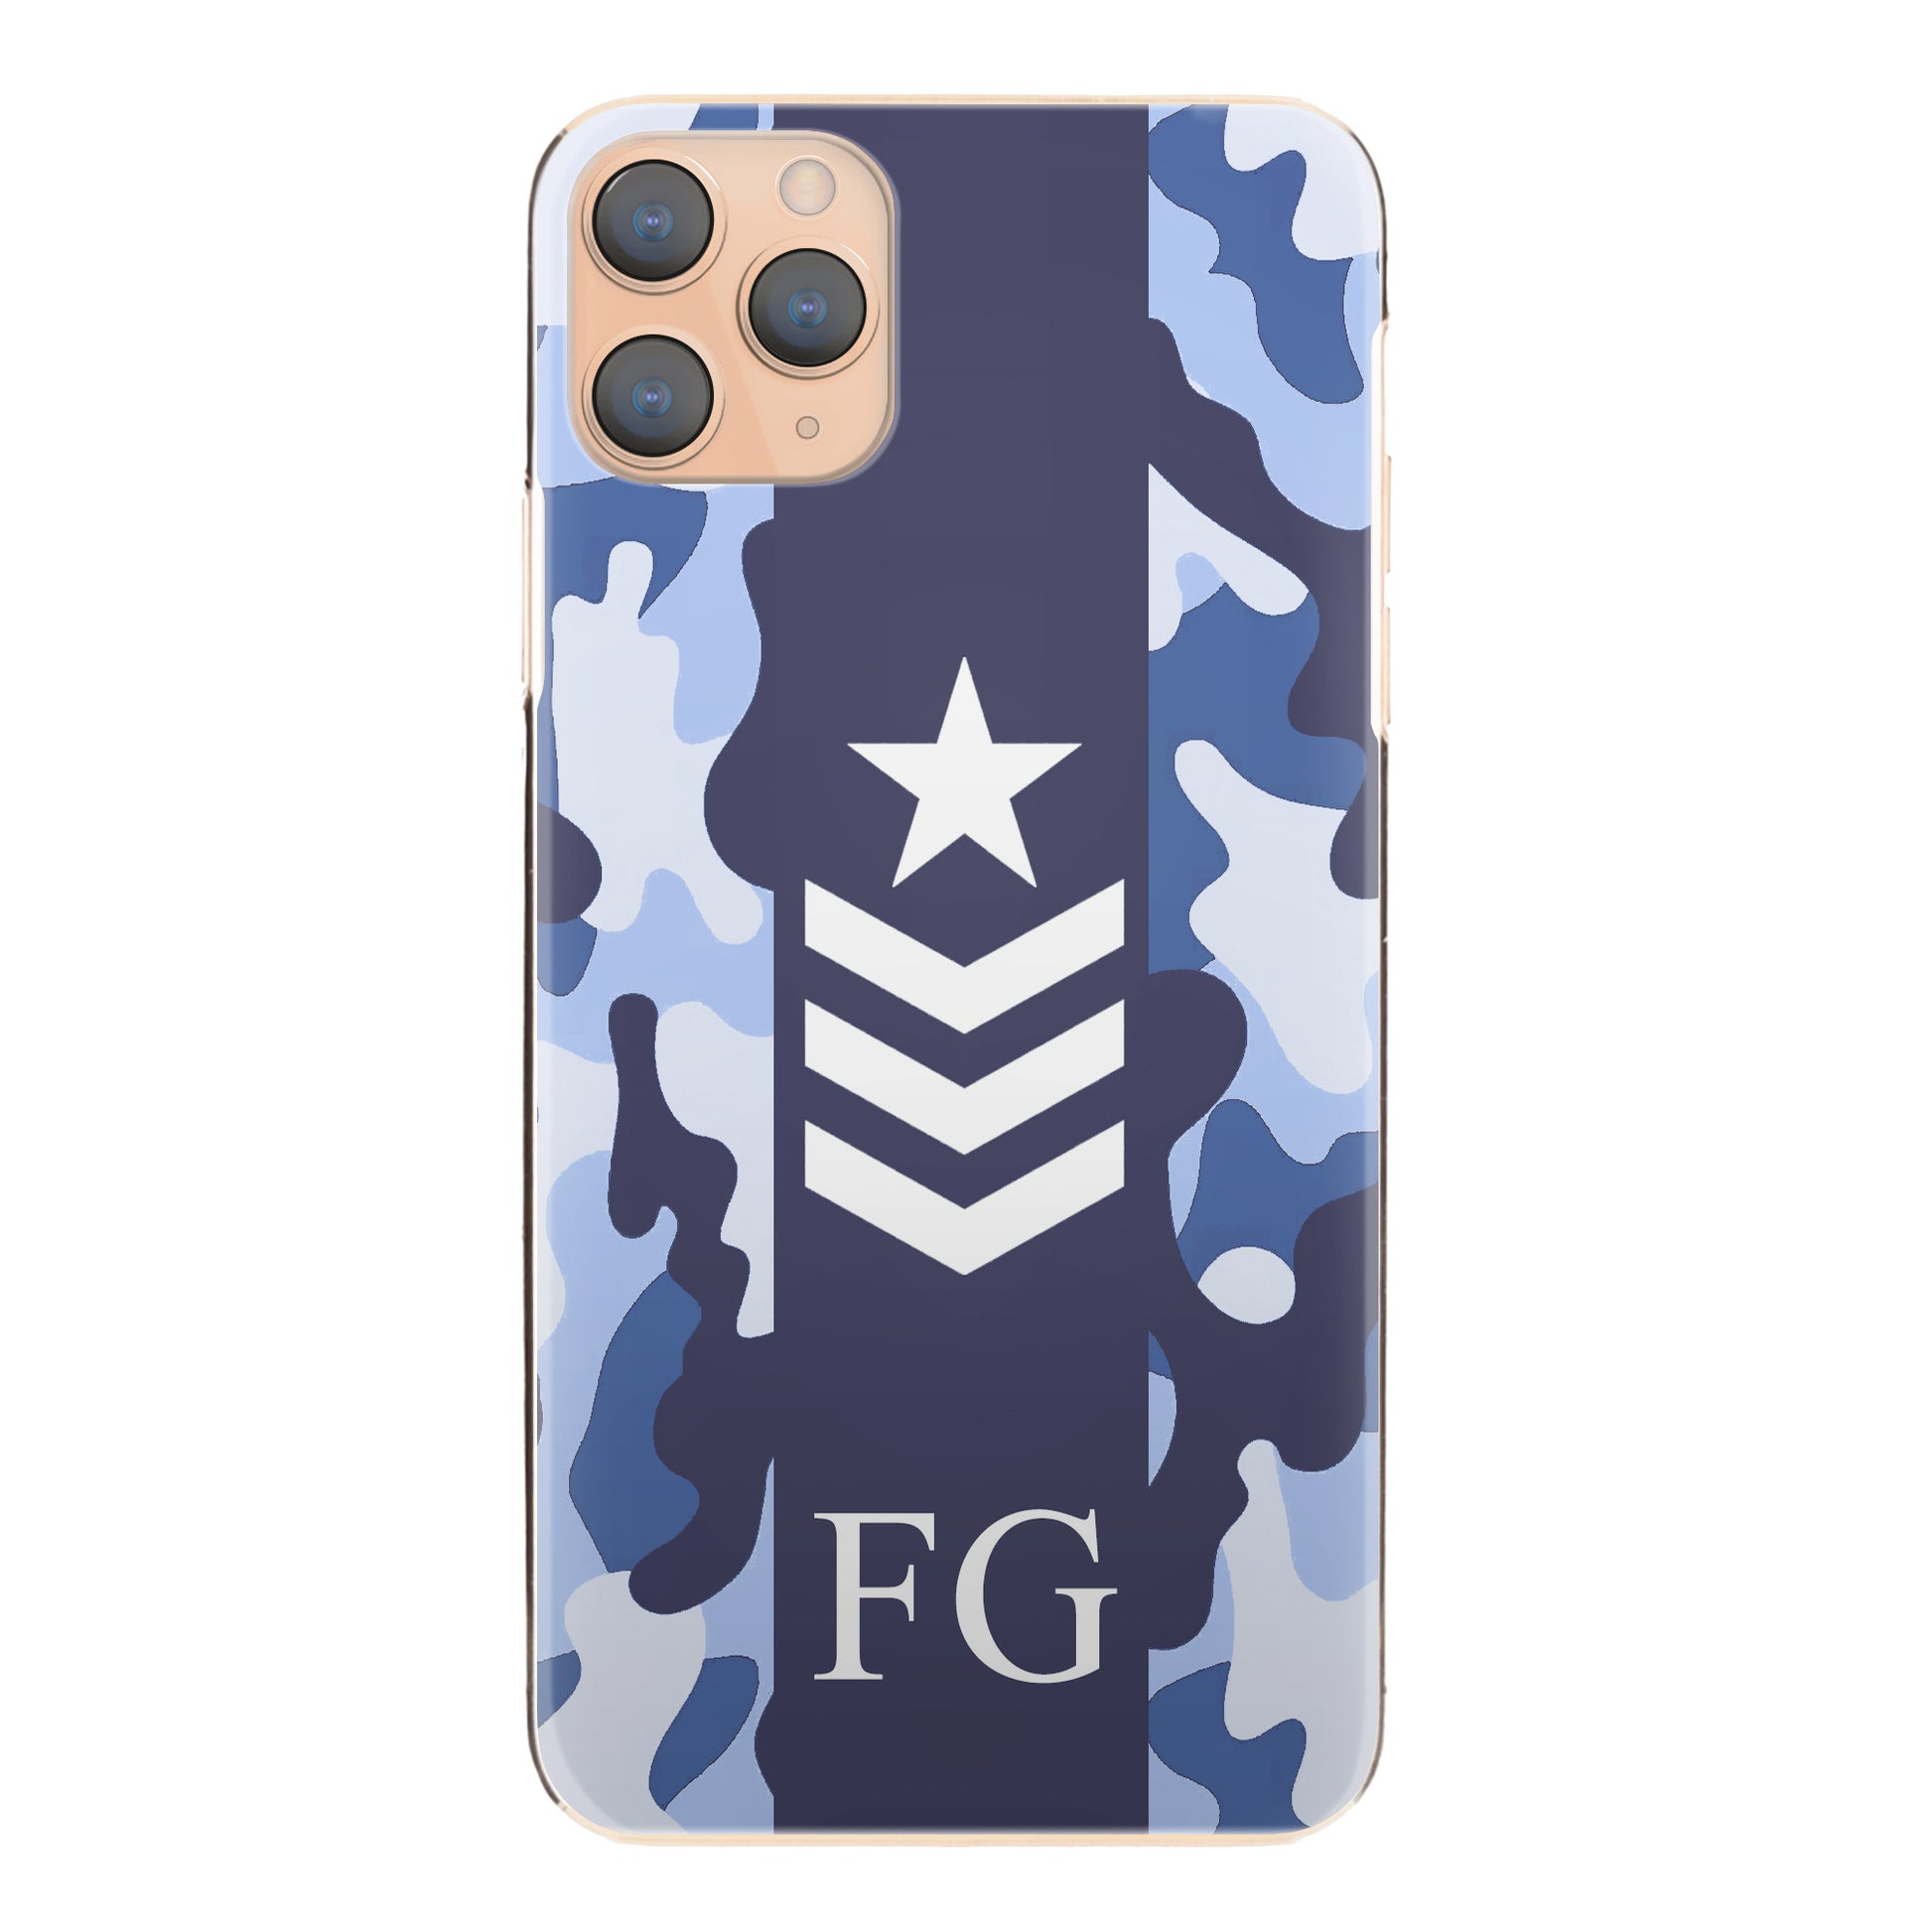 Personalised HTC Phone Hard Case with Initials and Army Rank on Blue Camo